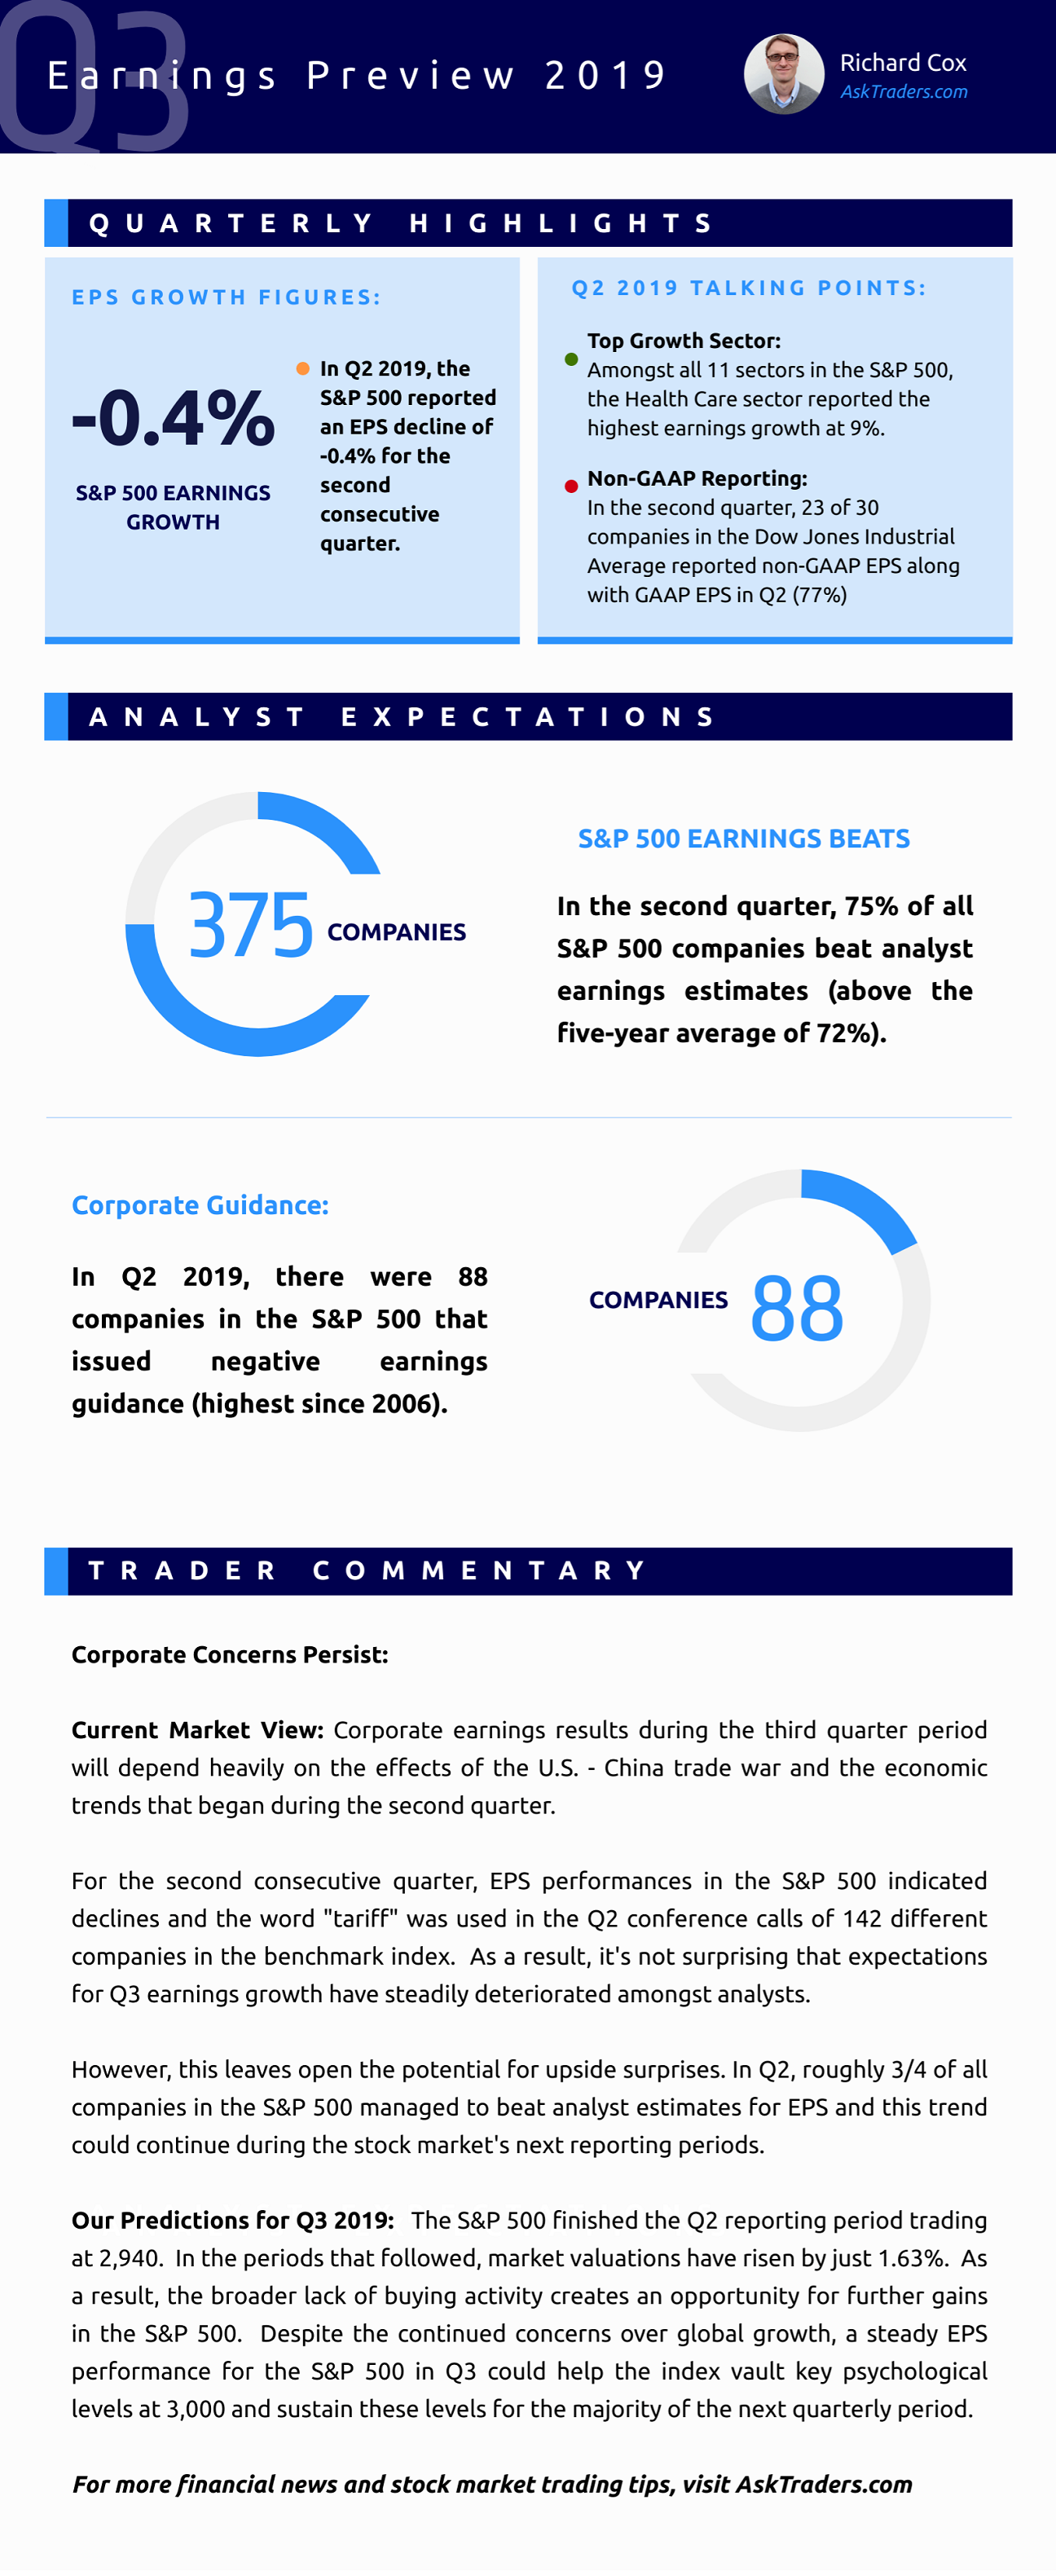 Earnings Preview 2019 #infographic